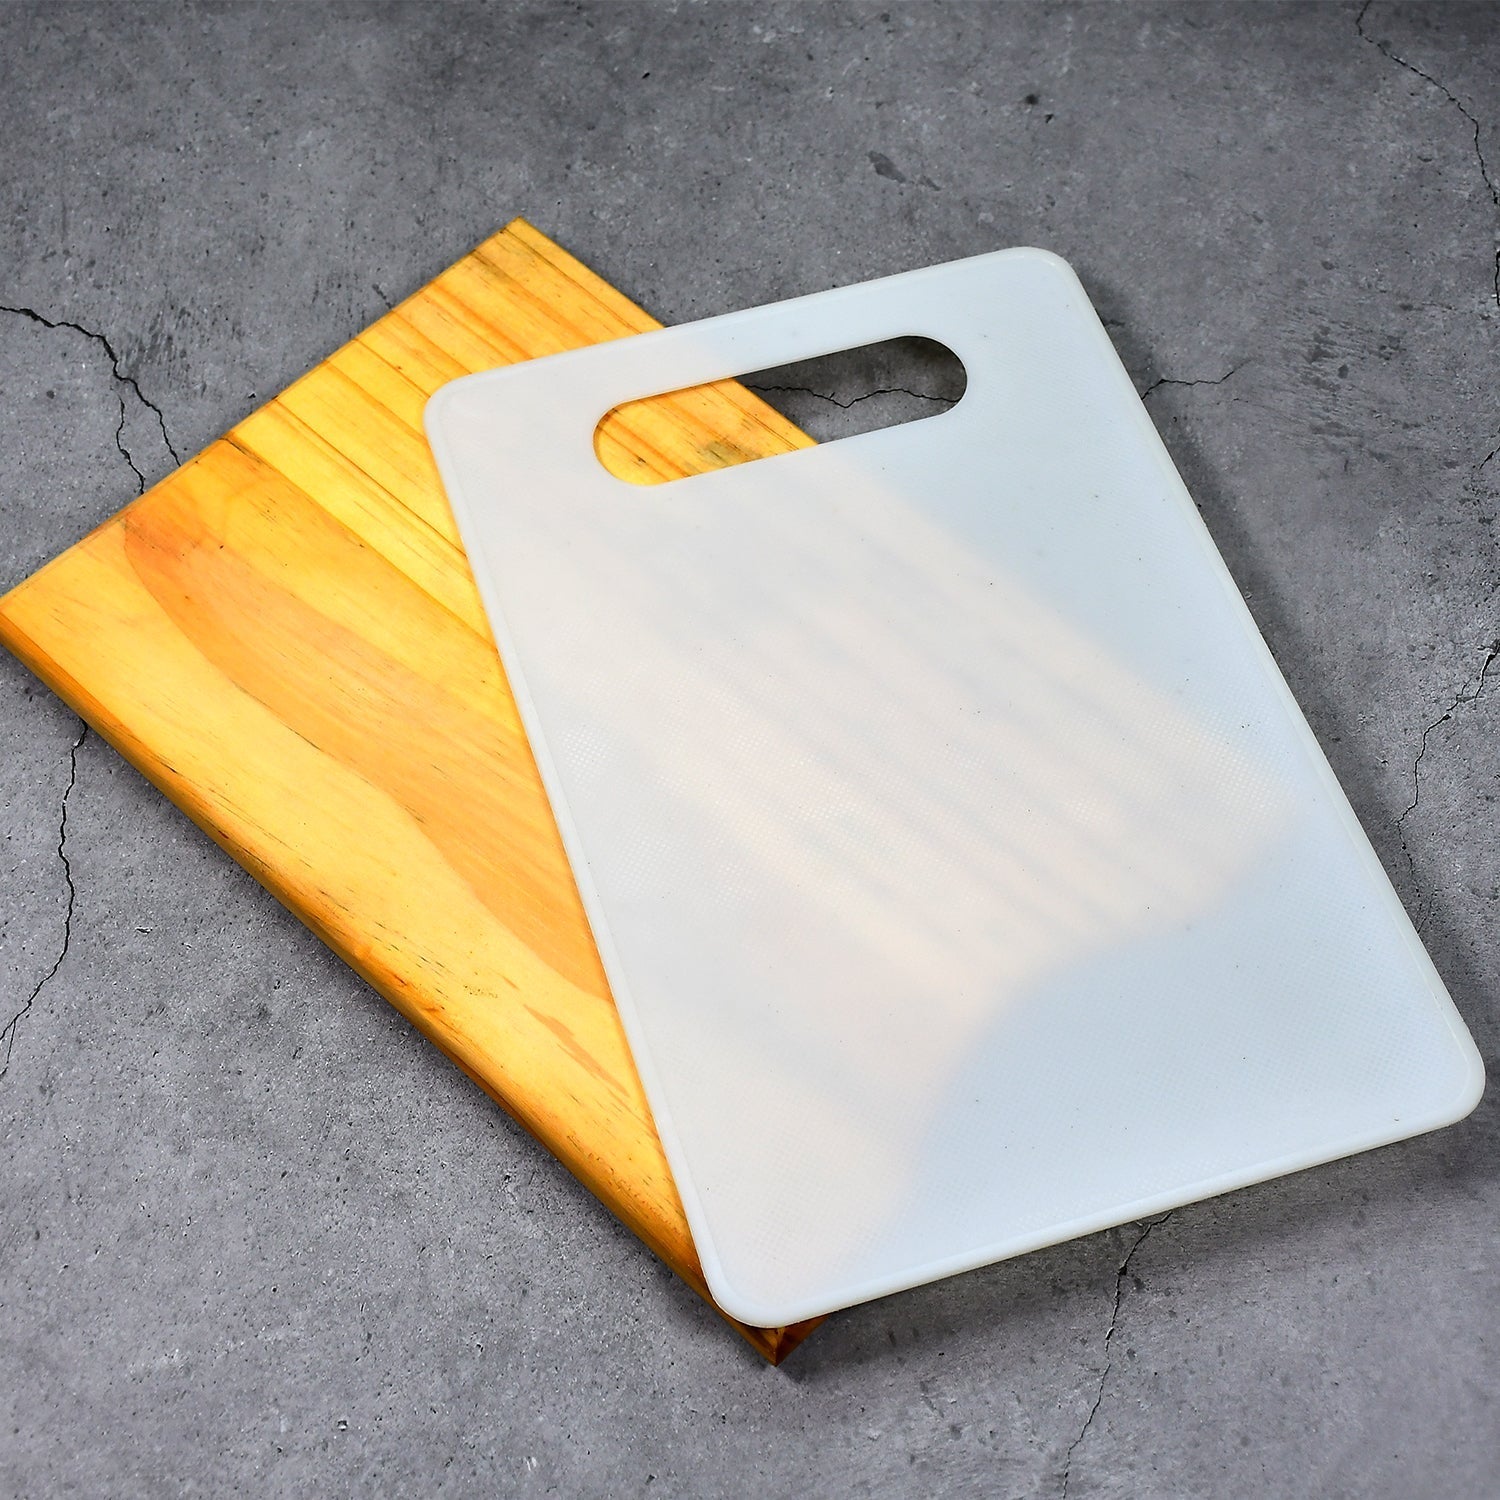 2986 White Thick/Long Lasting BPA Free Kitchen Chopping Boards Cutting Board Plastic with Handle for Regular Use. DeoDap